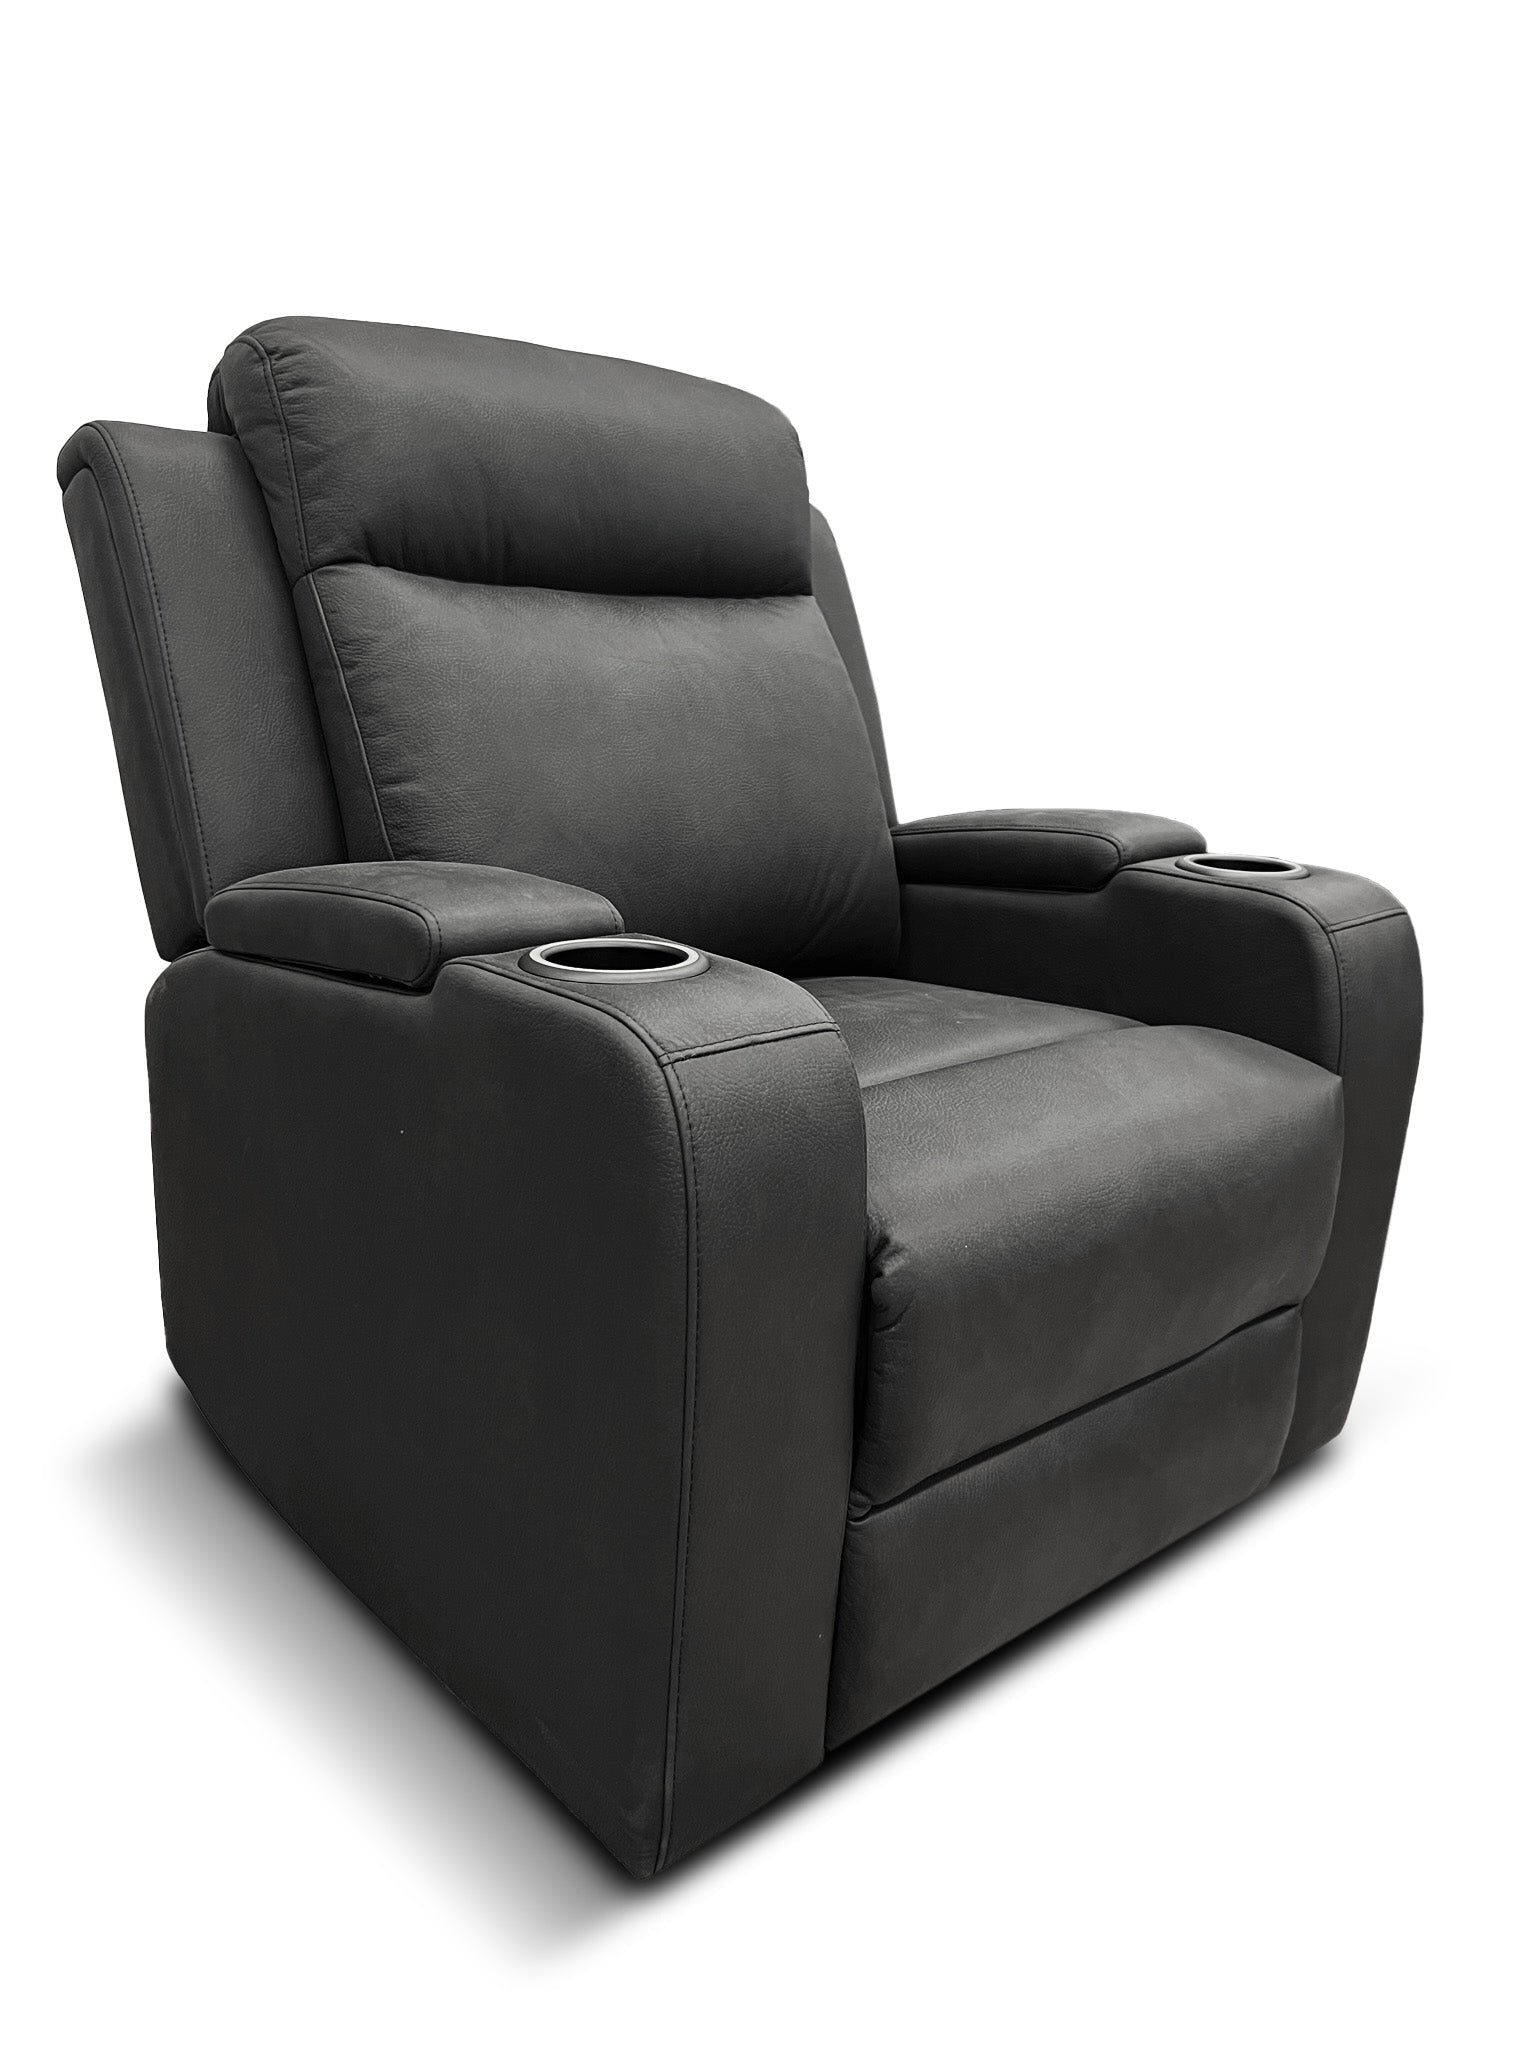 Cleo single electric recliner with dual electric recliners